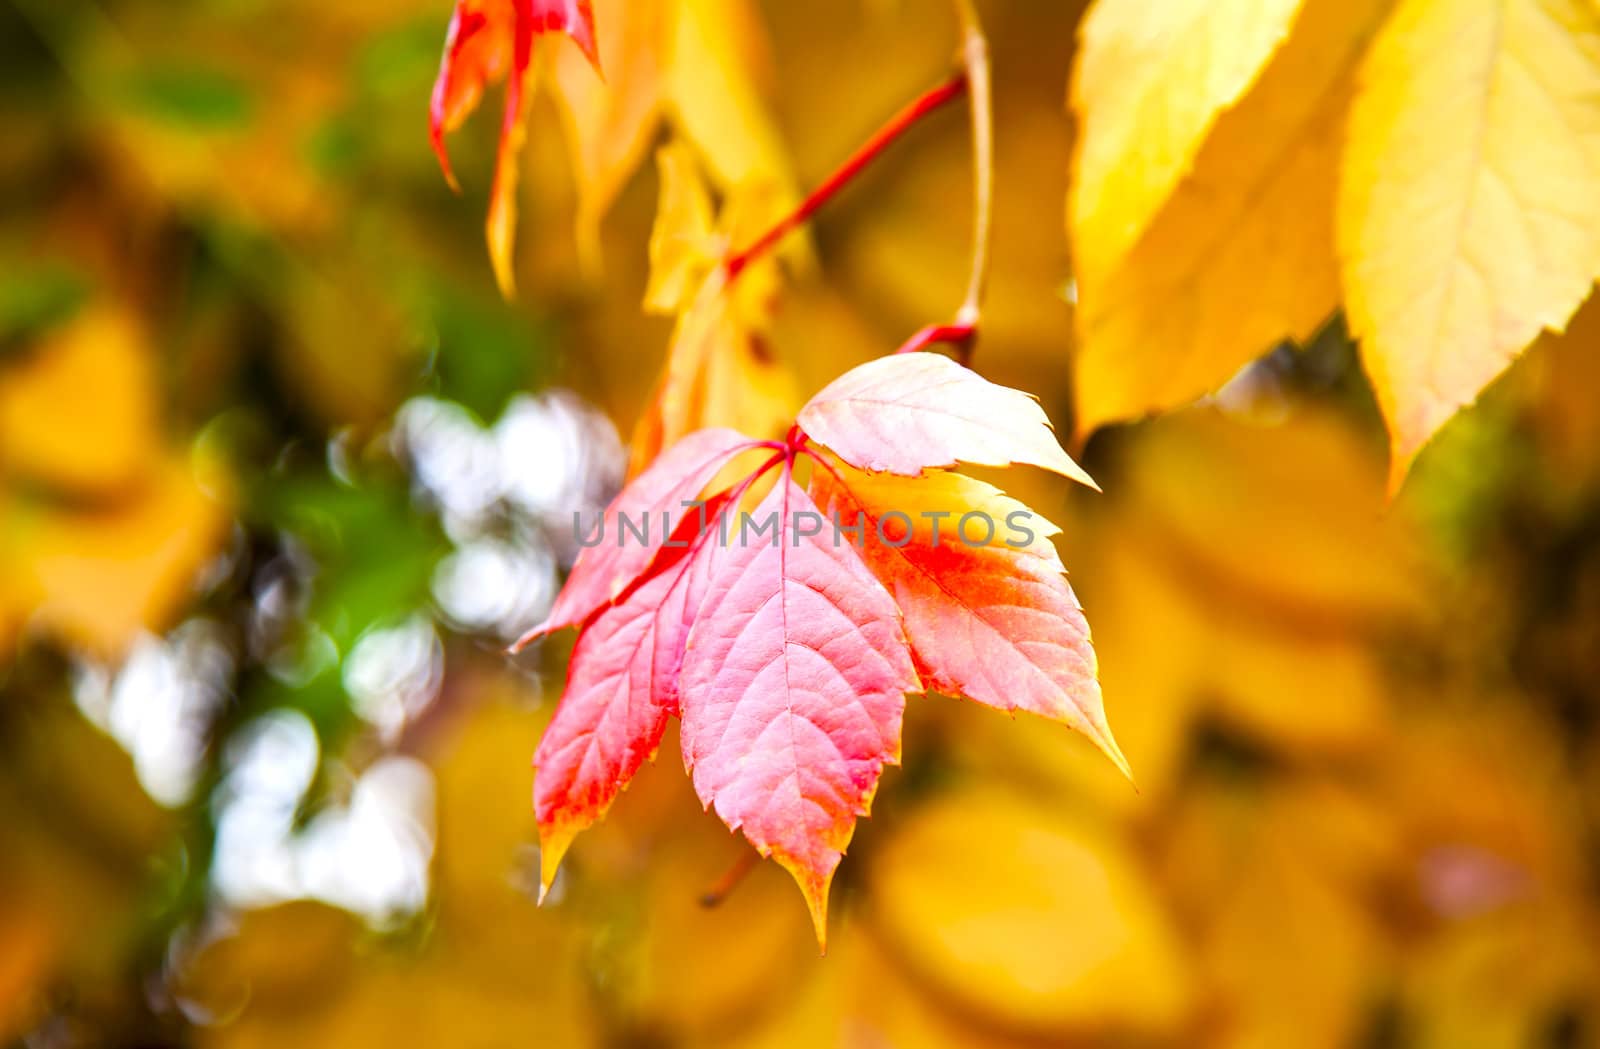 Autumn red leaа on golden foliage background by RawGroup